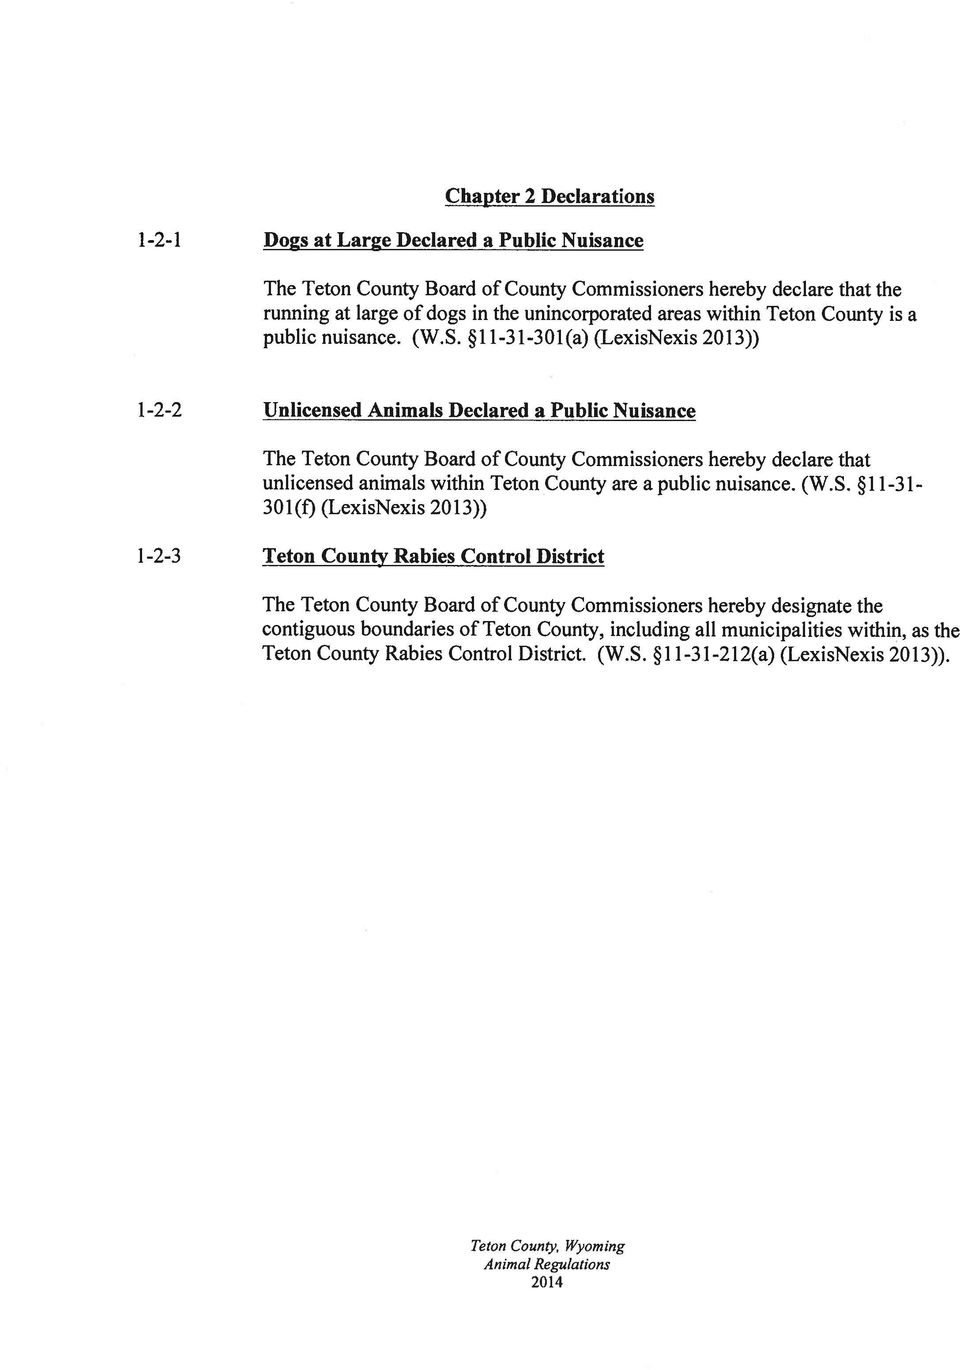 11-31-301(a) (LexisNexis 2013)) 1-2-2 Unlicensed Animals Declared a Public Nuisance The Teton County Board of County Commissioners hereby declare that unlicensed animals within Teton County